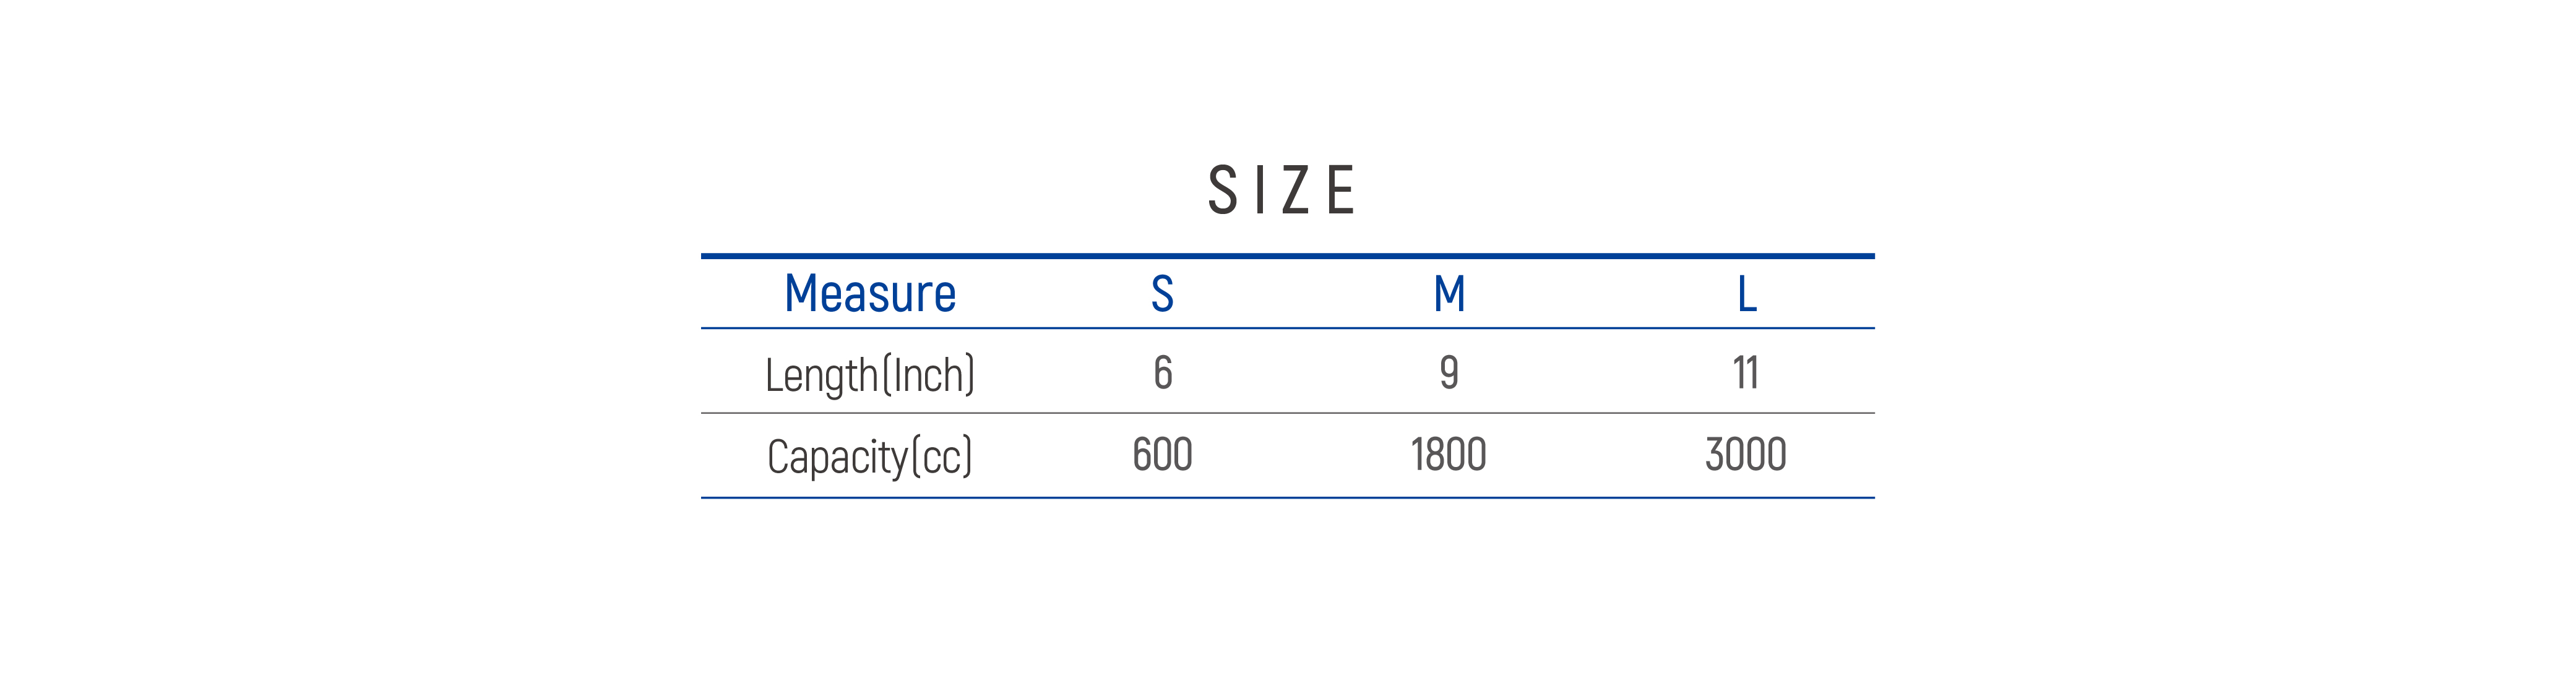 DR-IB001 Size table image